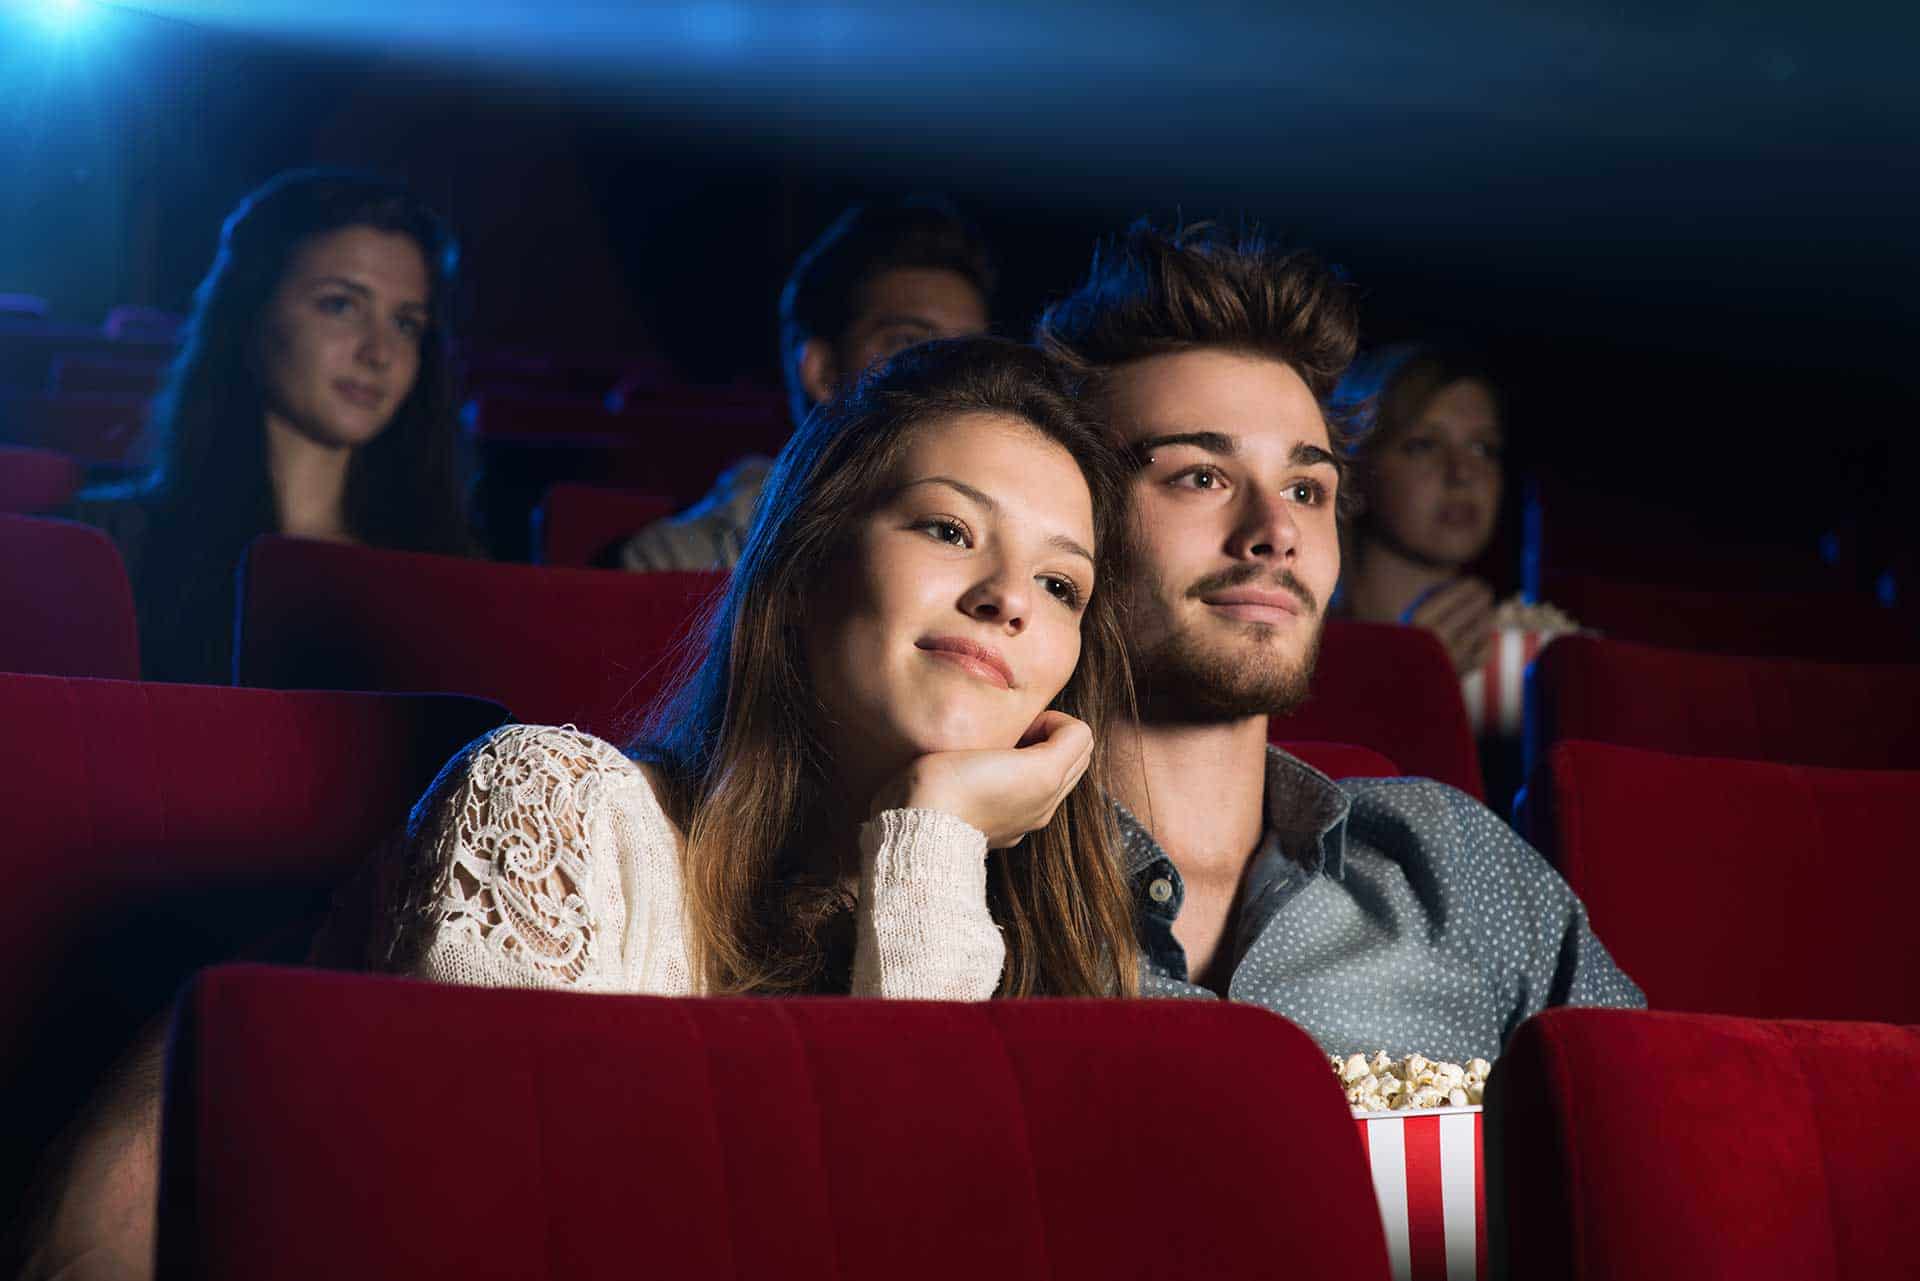 Top Date Night Movies to Set the Mood